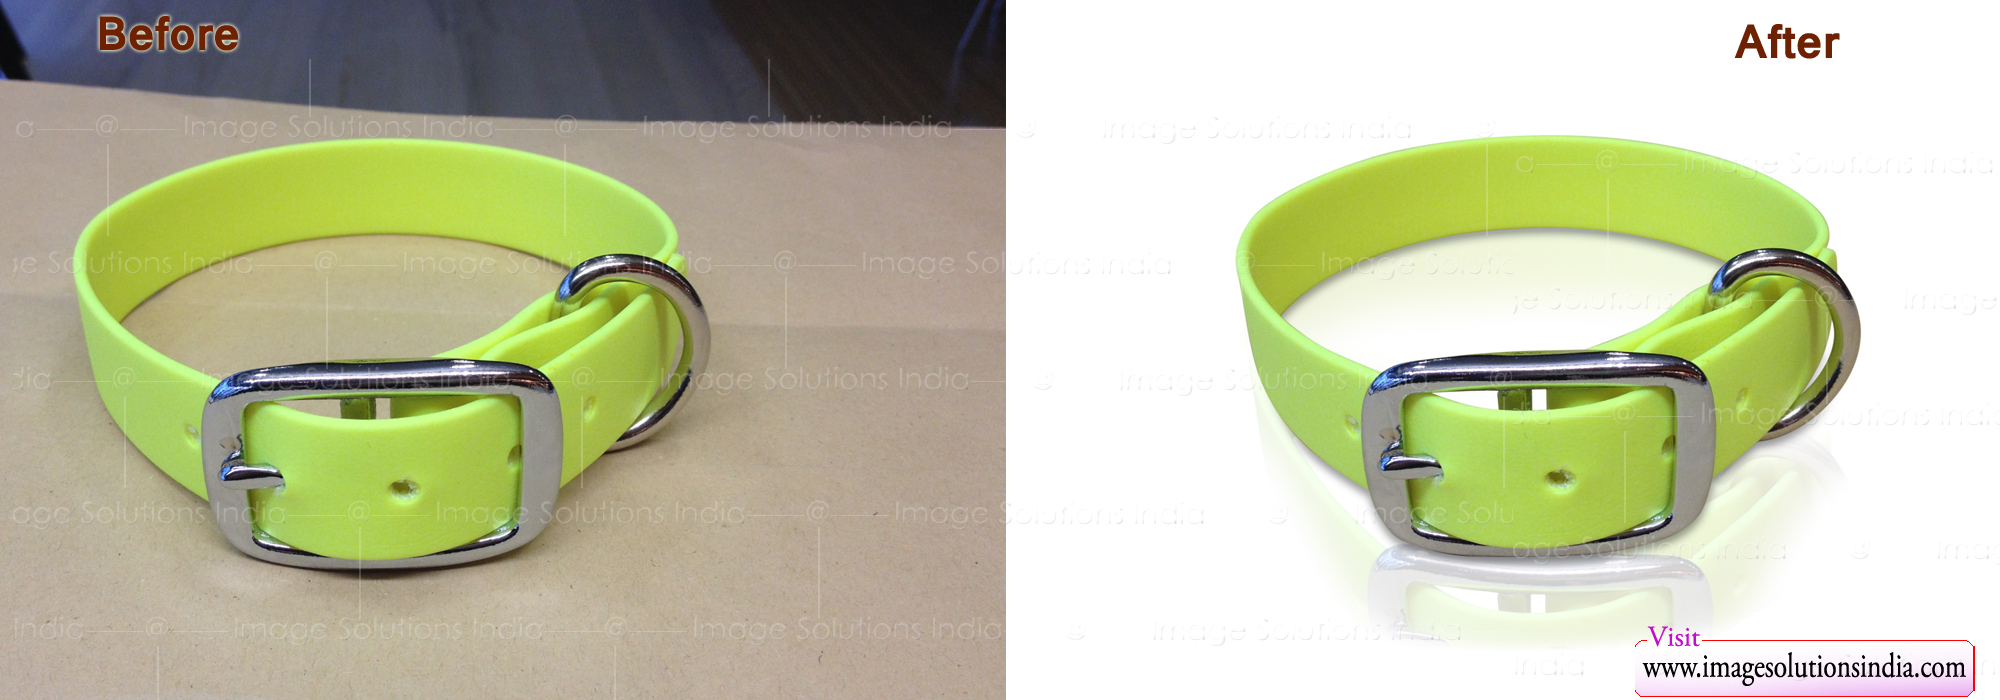 image clipping path services